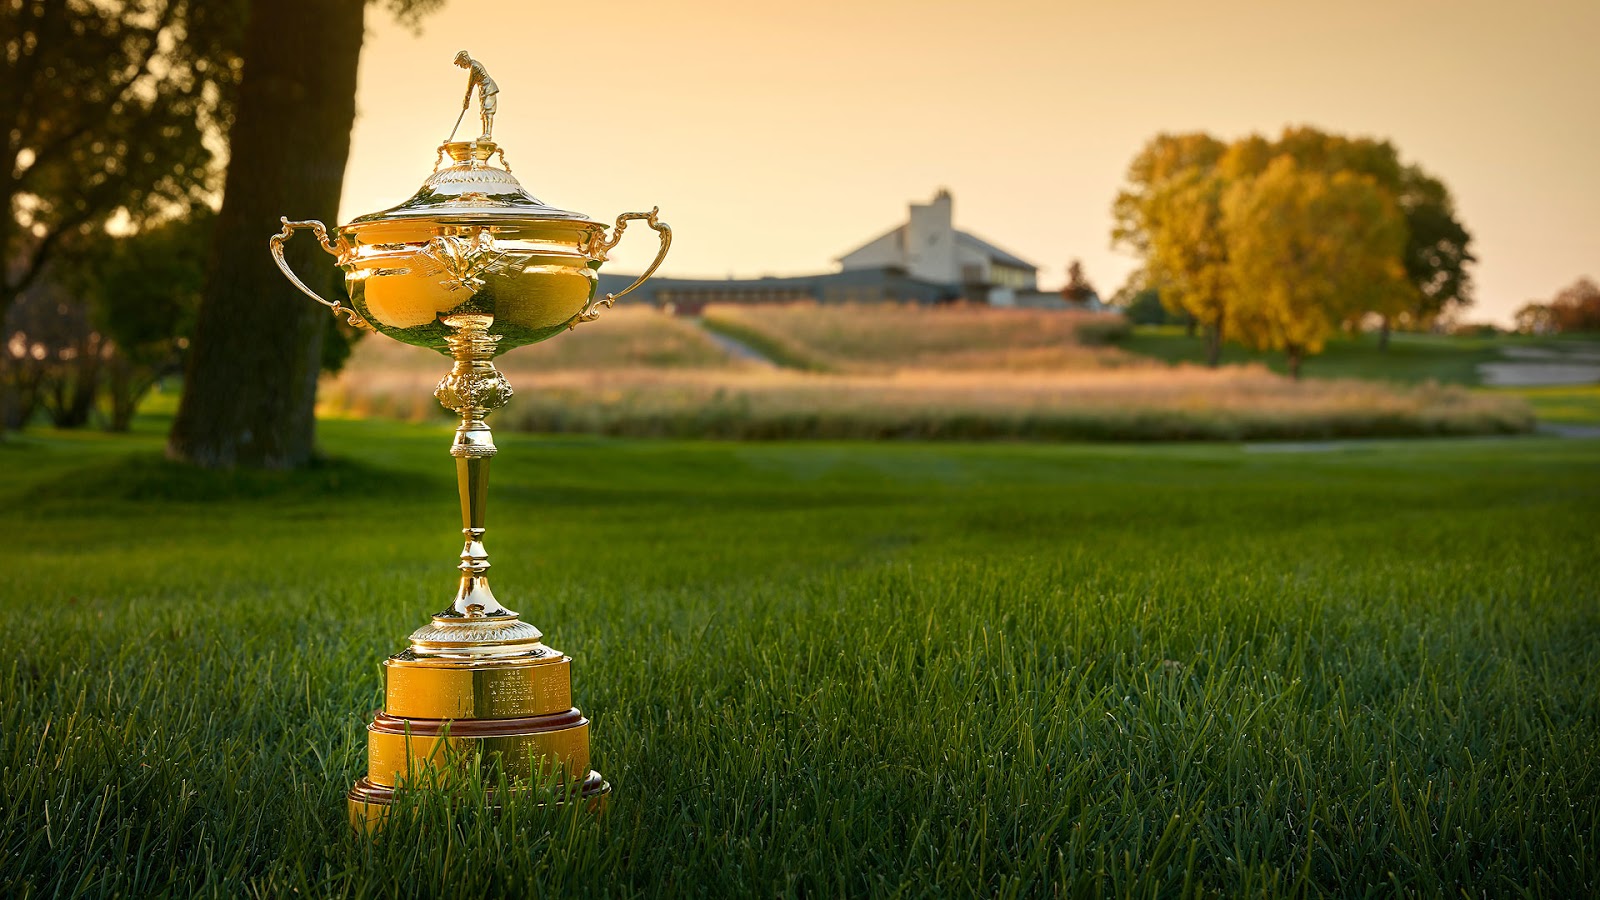 Ryder Cup trophy on a lush green lawn at sunrise.